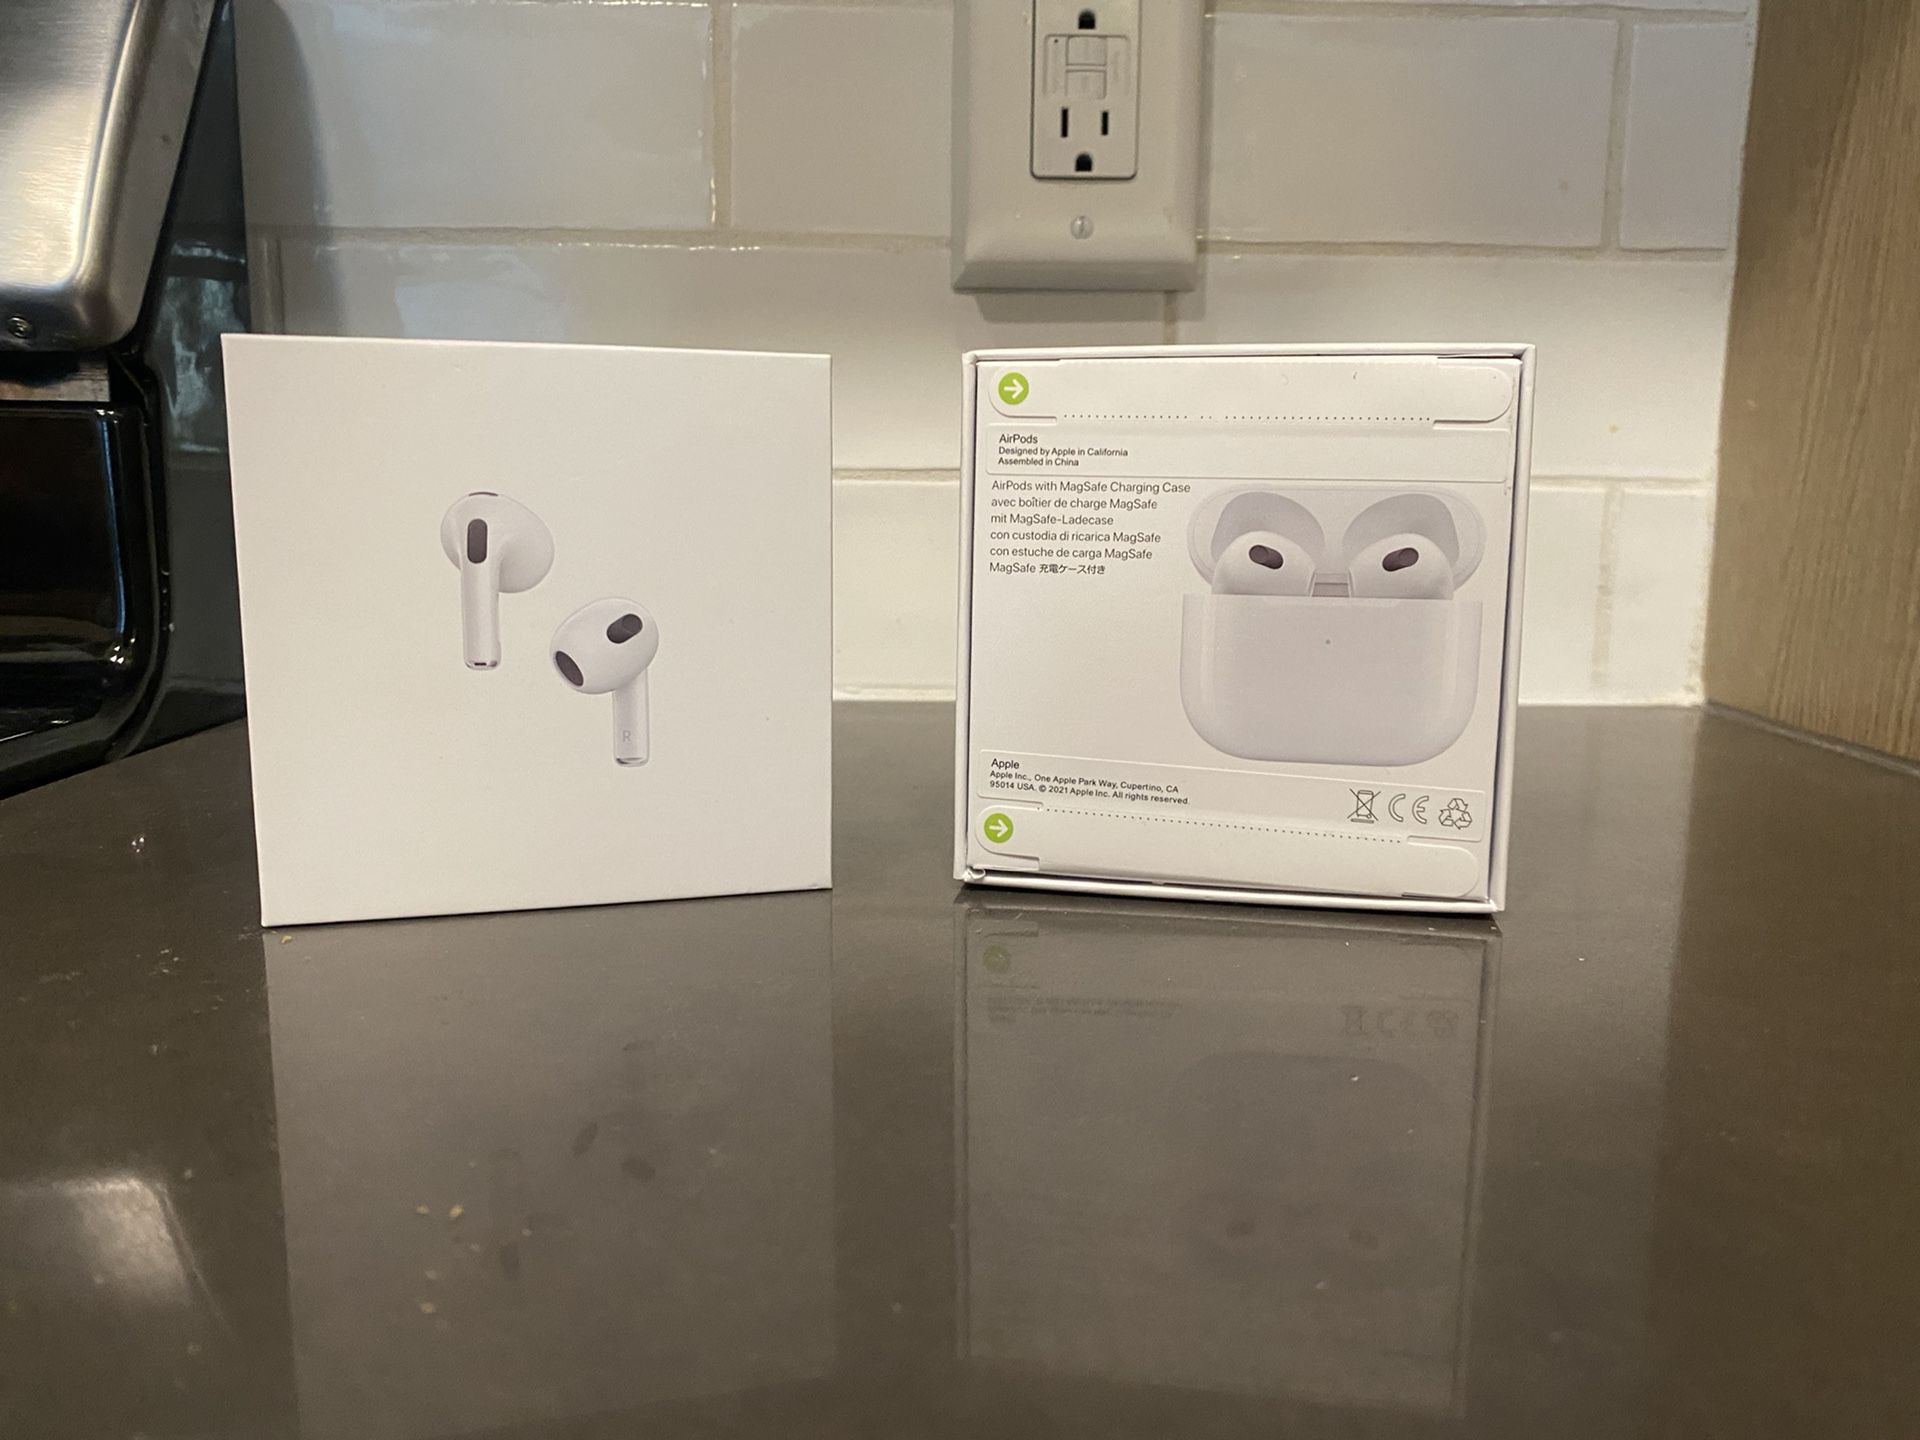 Airpods Pro 1st And 2nd Generation Cover Case for Sale in Anaheim, CA -  OfferUp